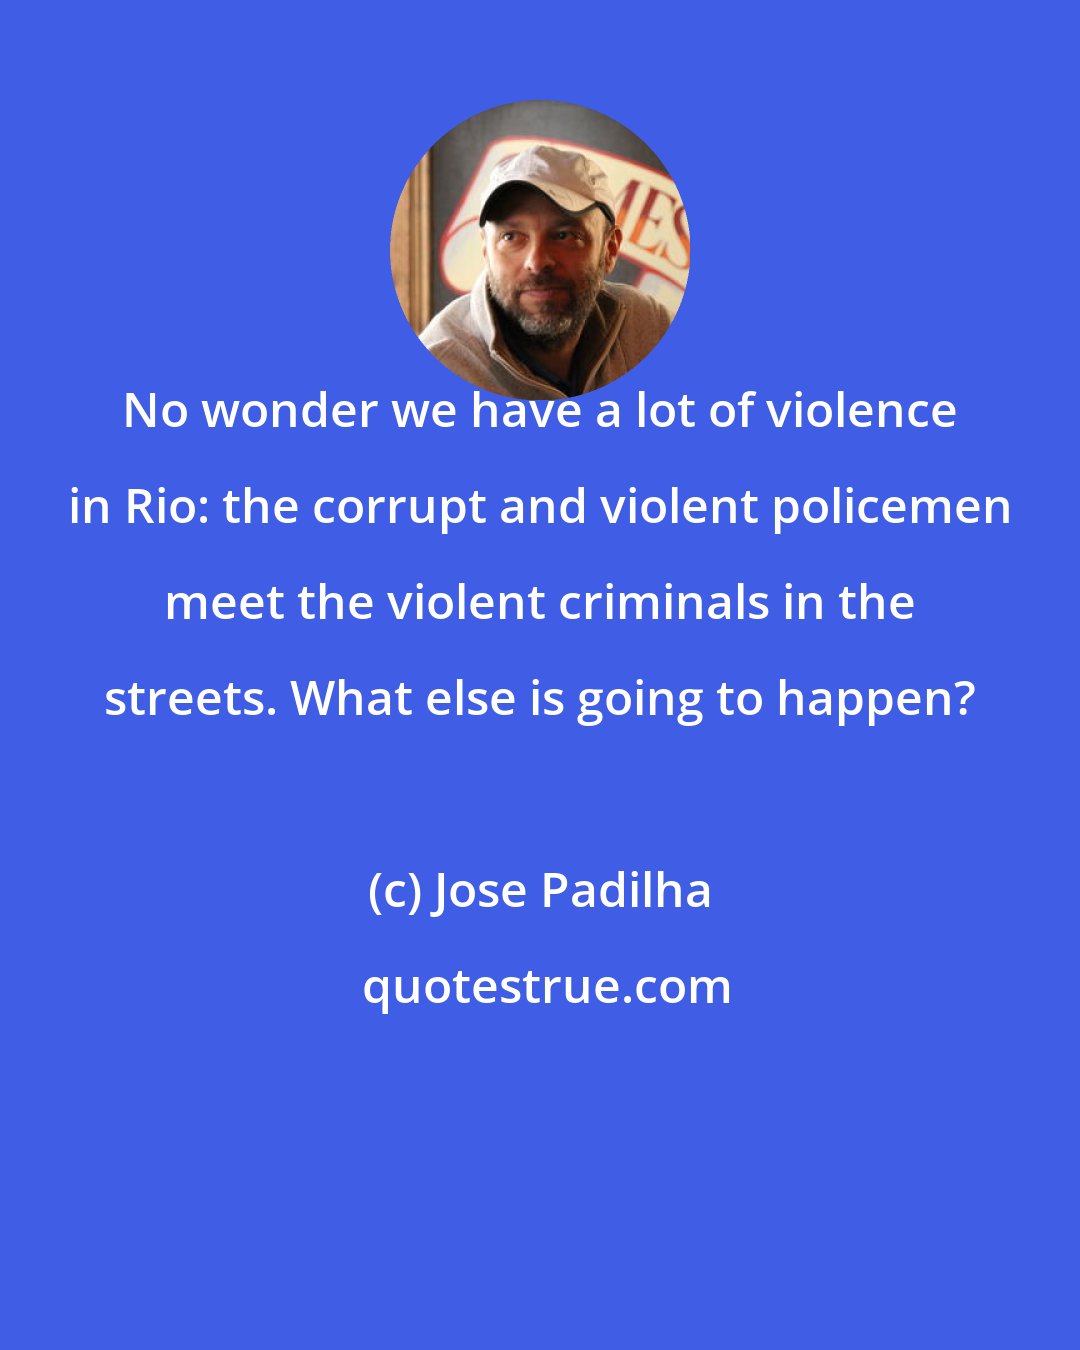 Jose Padilha: No wonder we have a lot of violence in Rio: the corrupt and violent policemen meet the violent criminals in the streets. What else is going to happen?